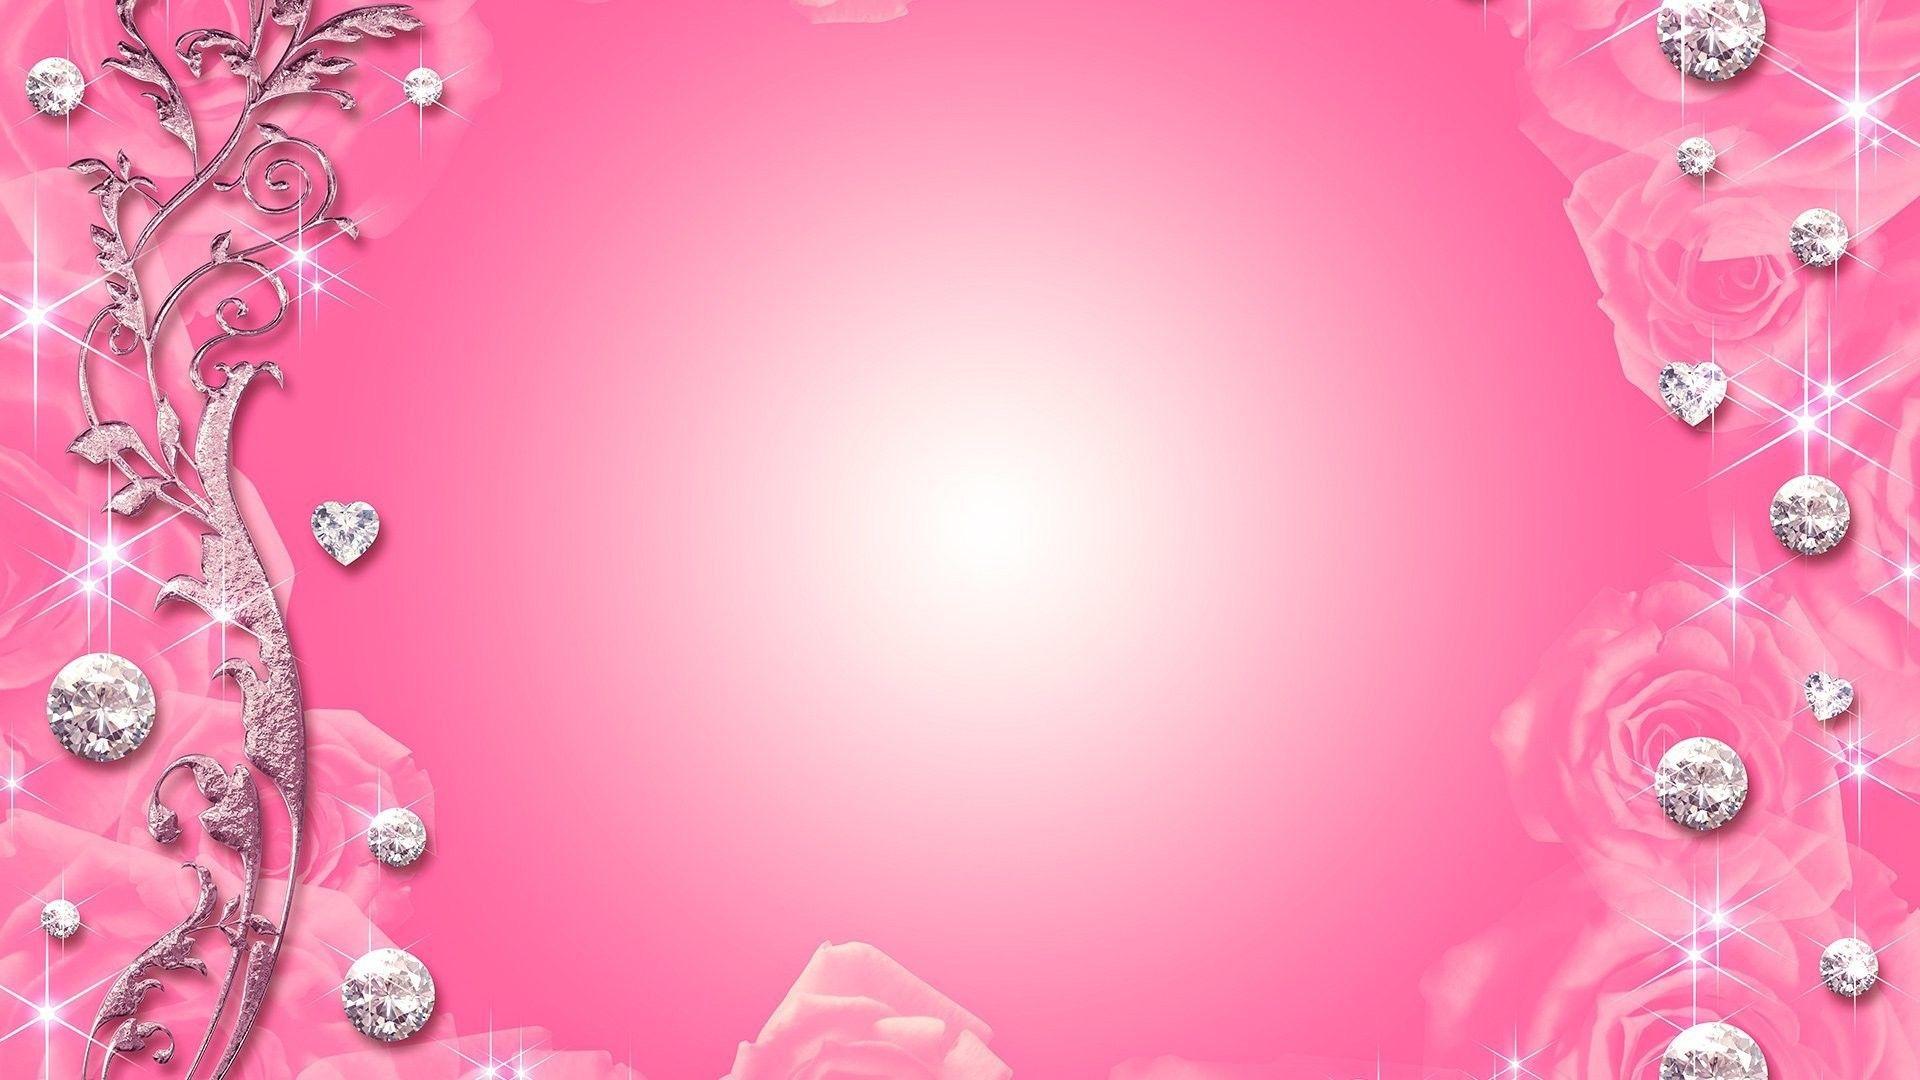 happy birthday background wallpaper pink HD 12. Background Check All